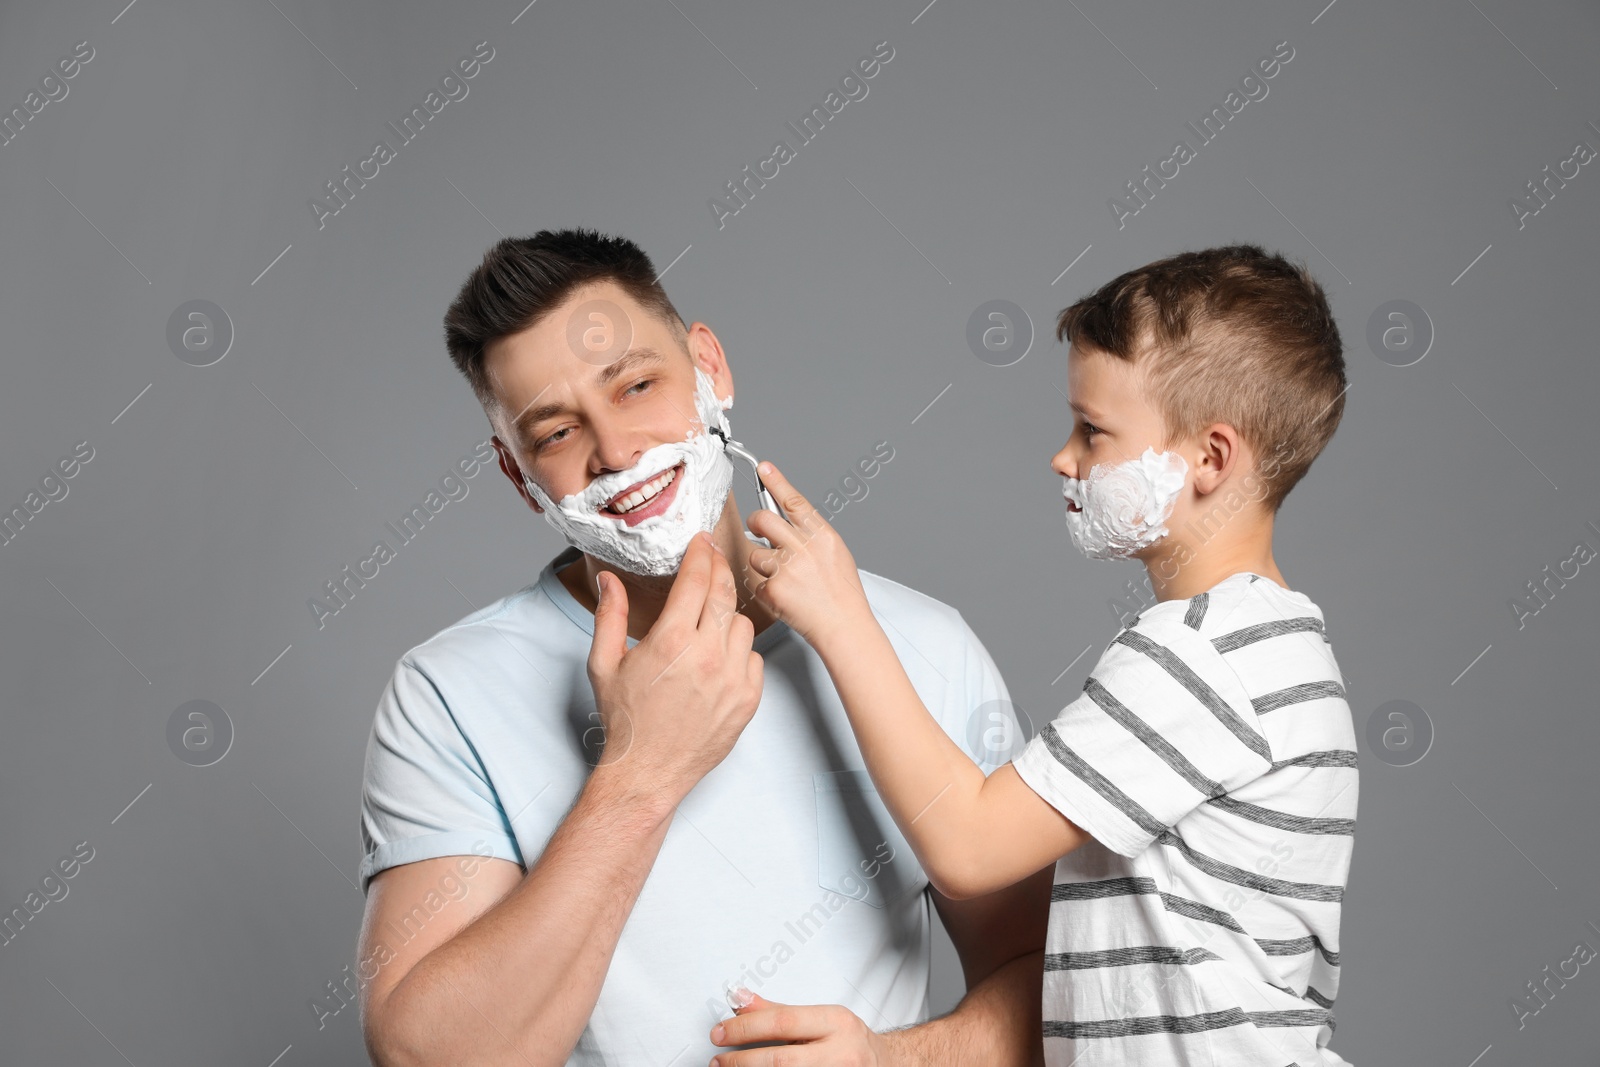 Photo of Son shaving his dad with razor on grey background